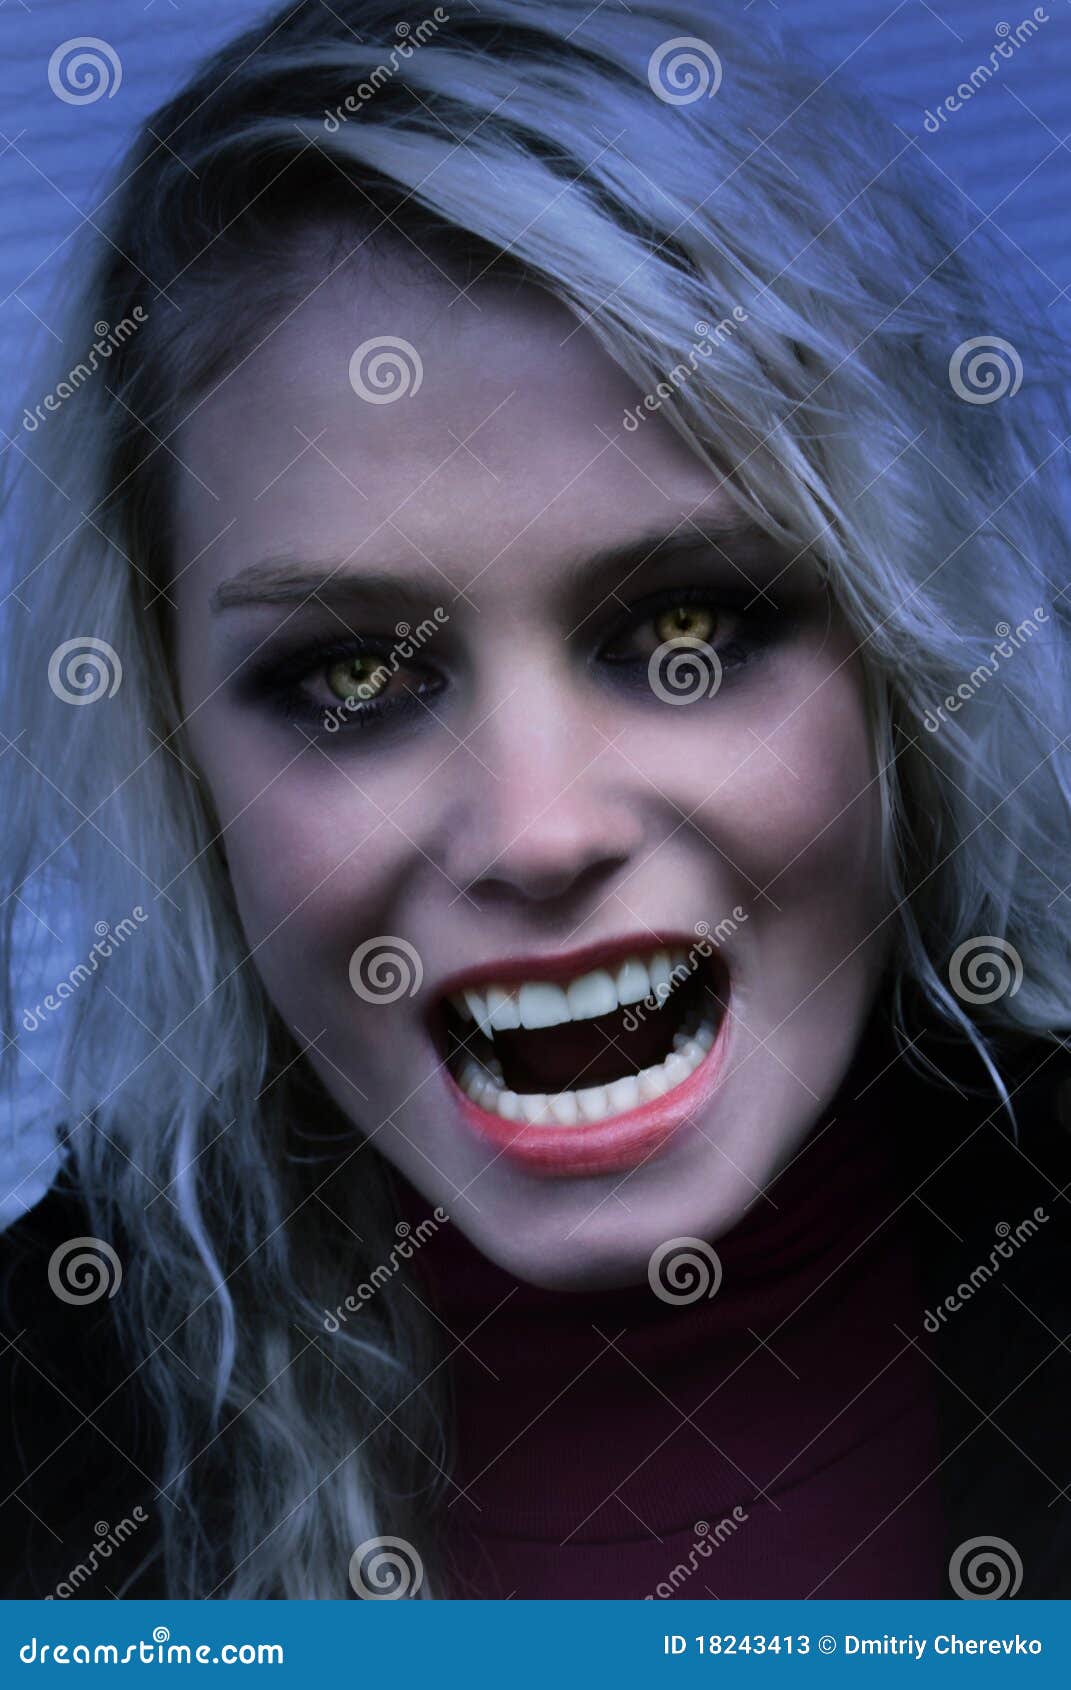 Hungry vampire stock image. Image of aggression, face - 18243413